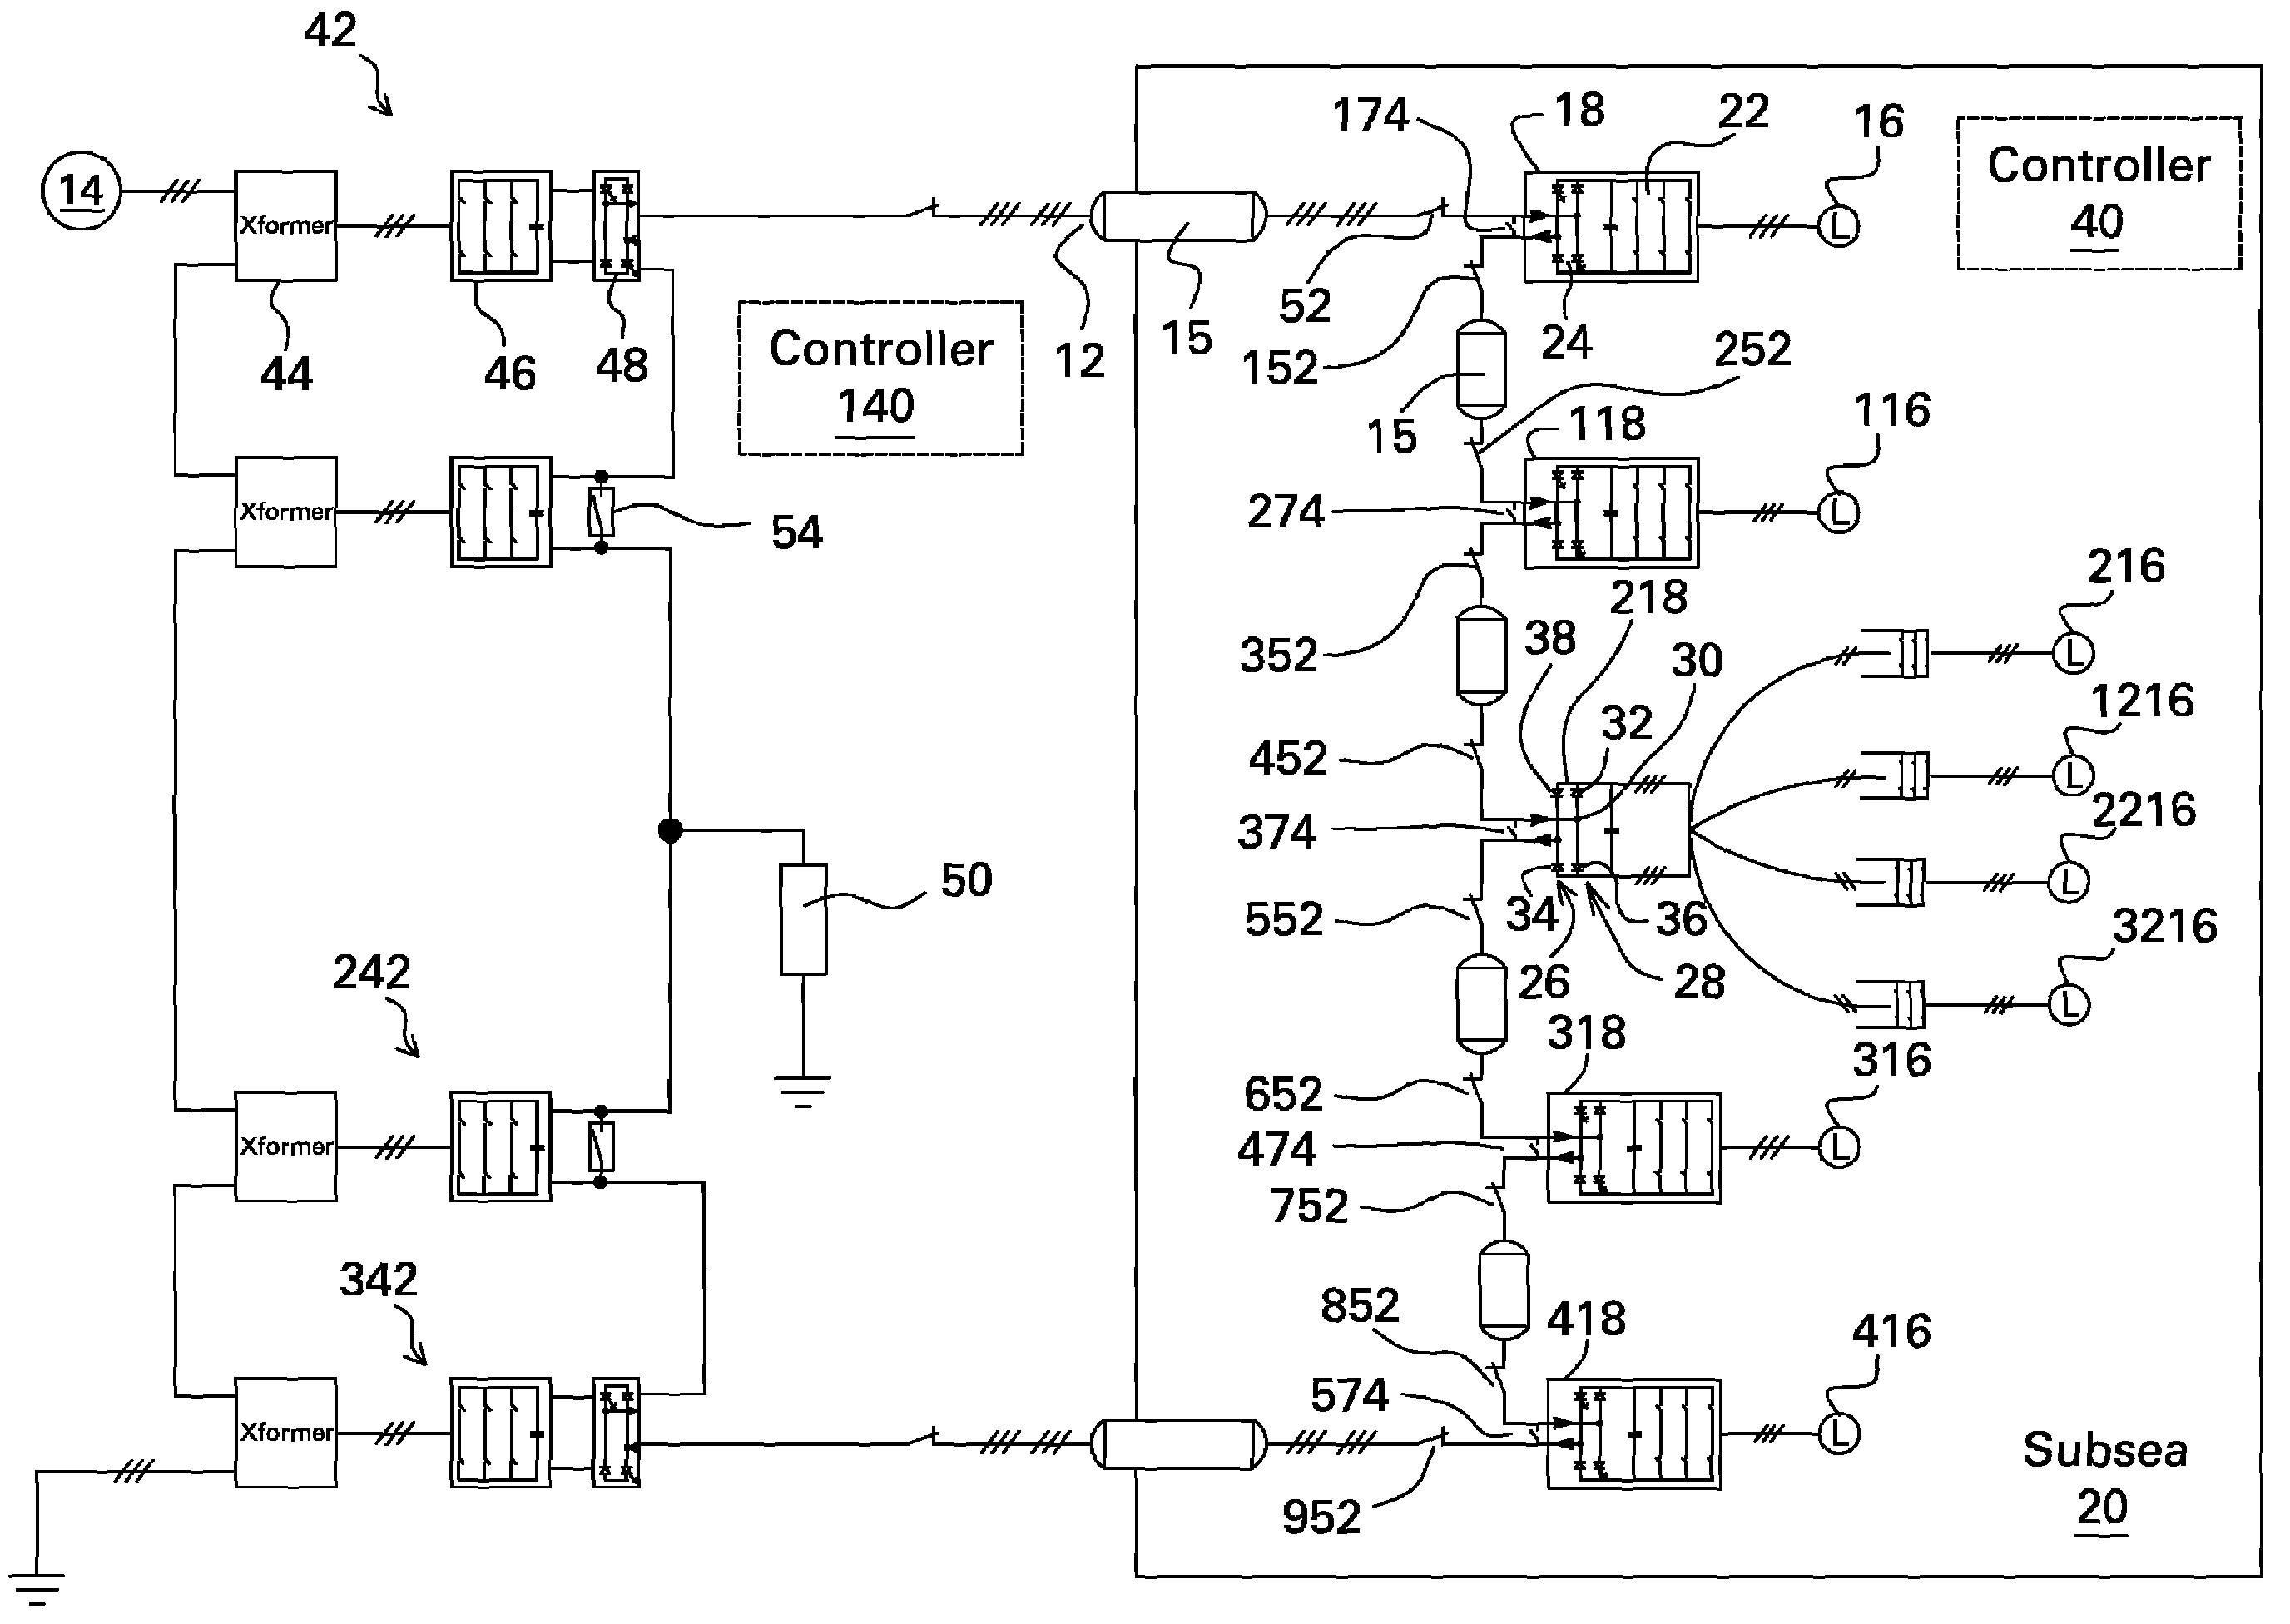 Direct current power transmission and distribution system